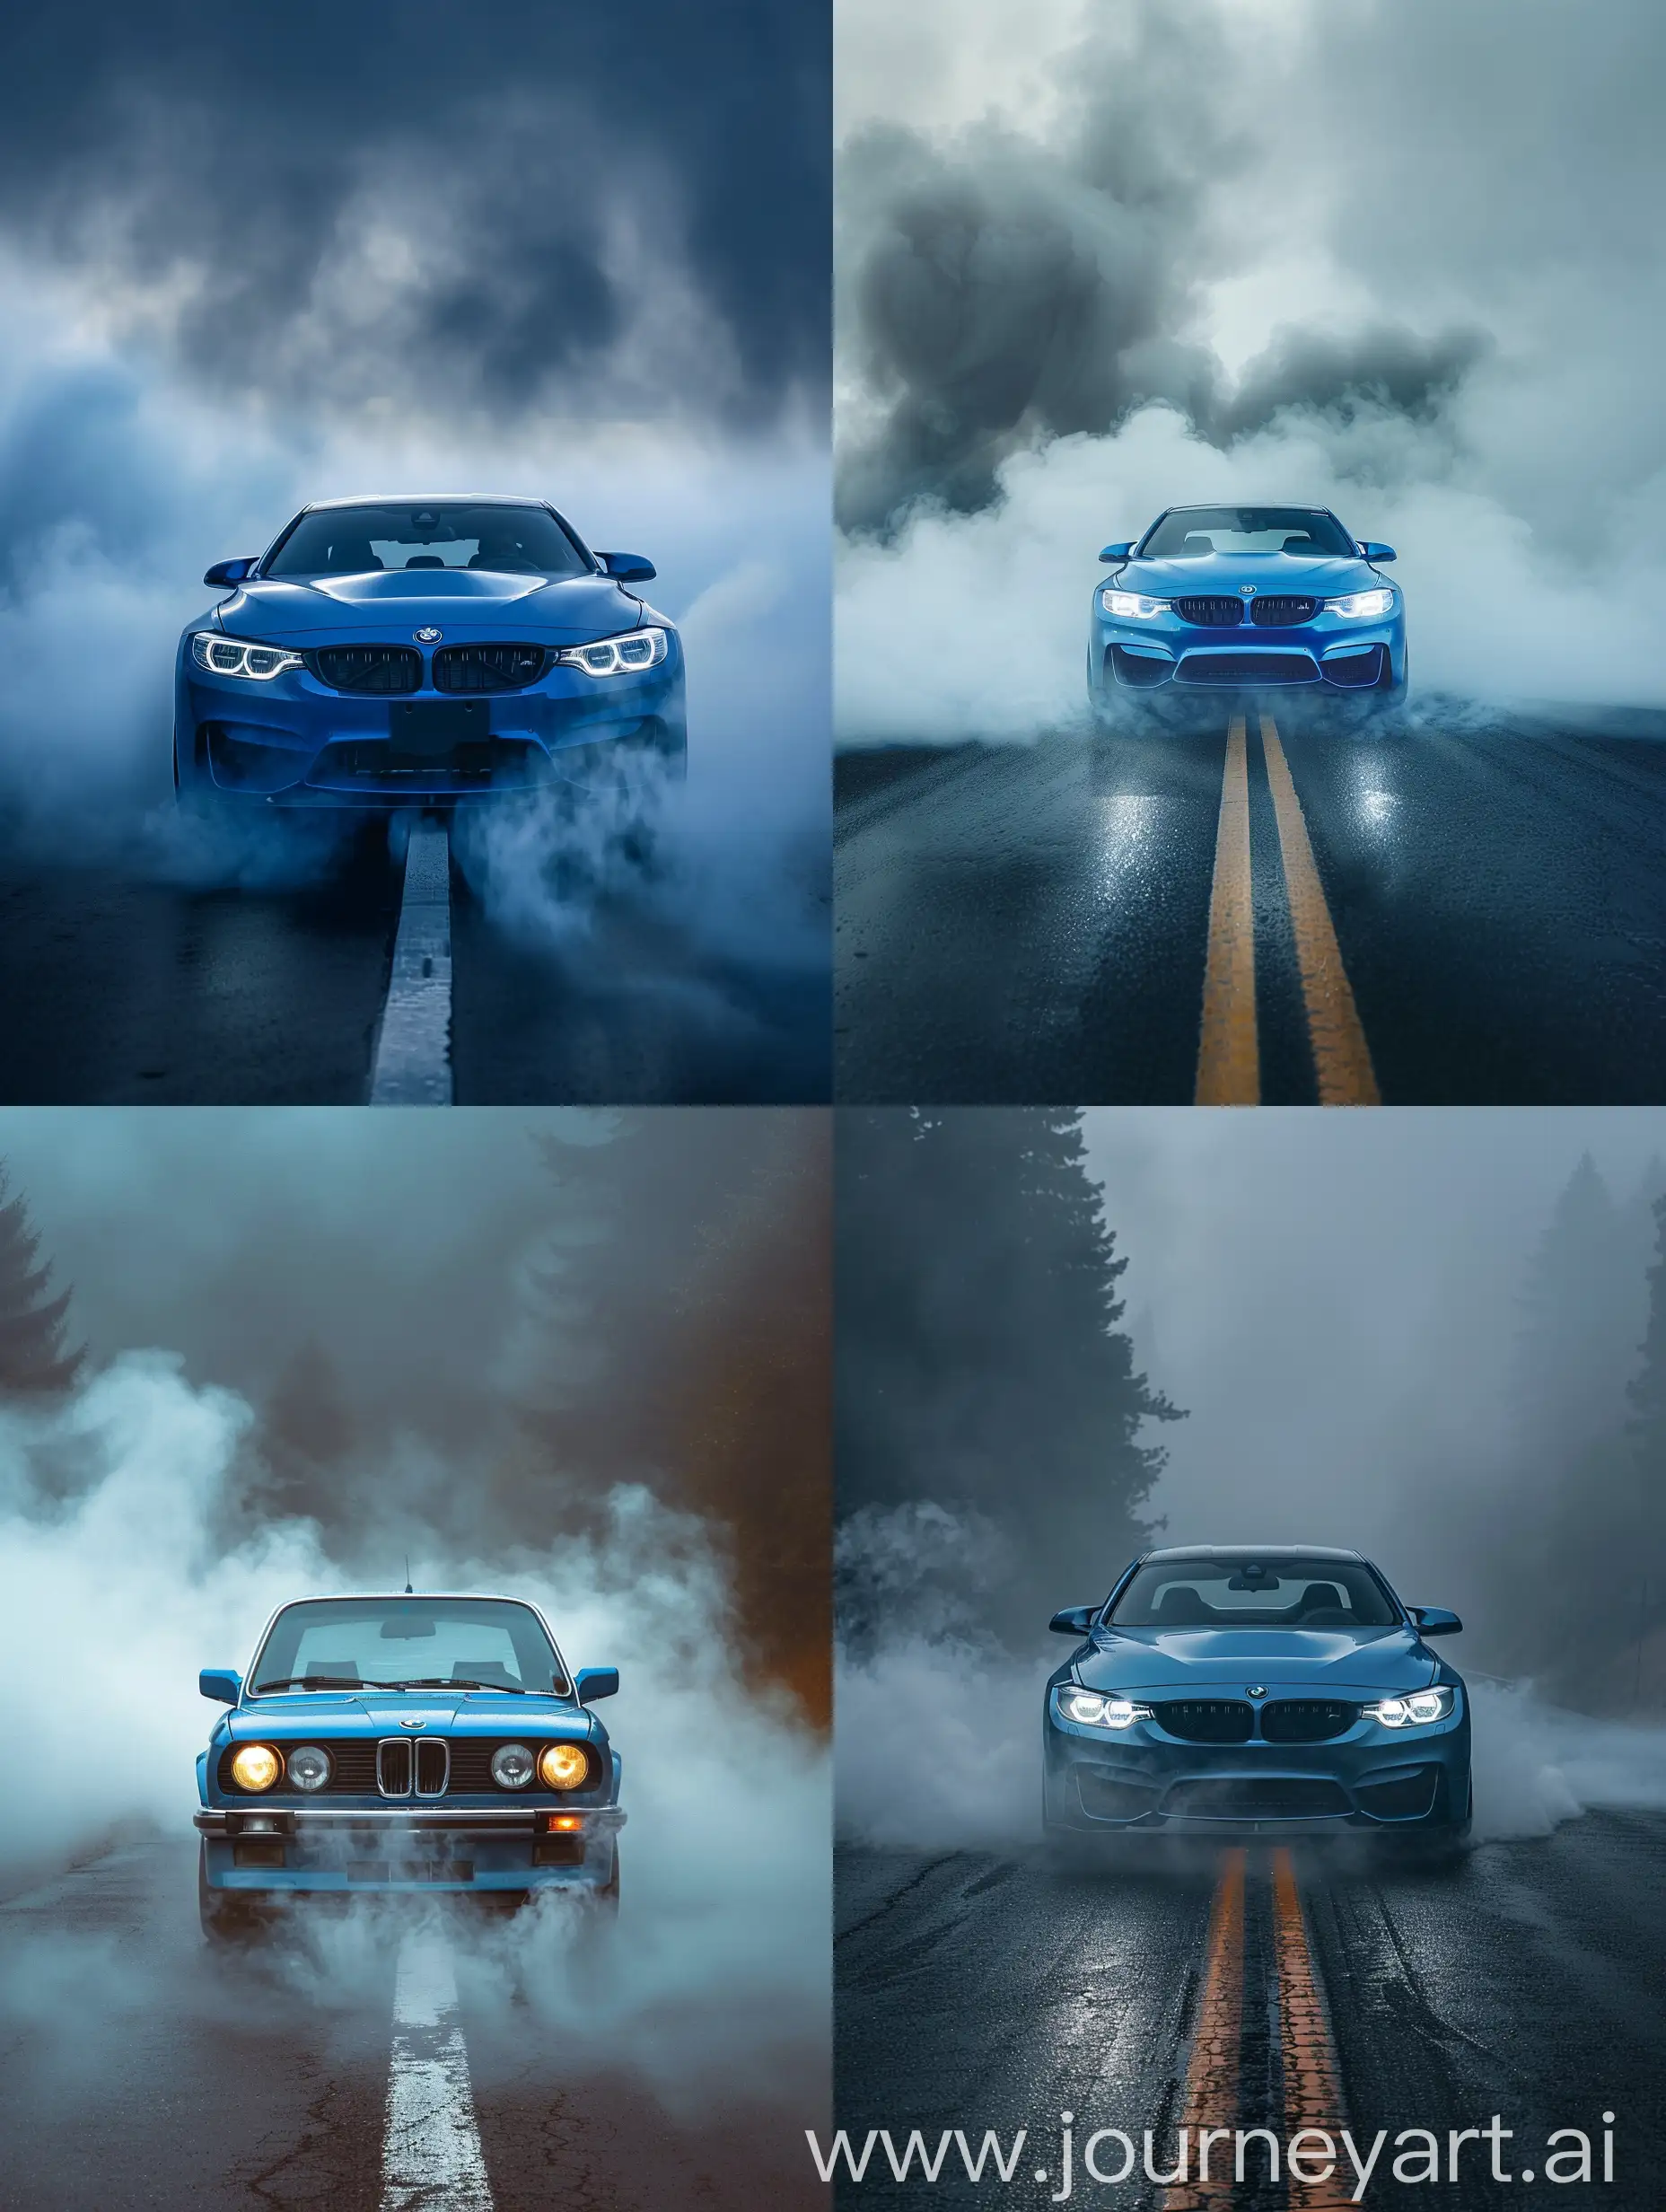 Blue-BMW-Automobile-on-Road-with-Radiator-Grille-and-Headlights-in-Smoke